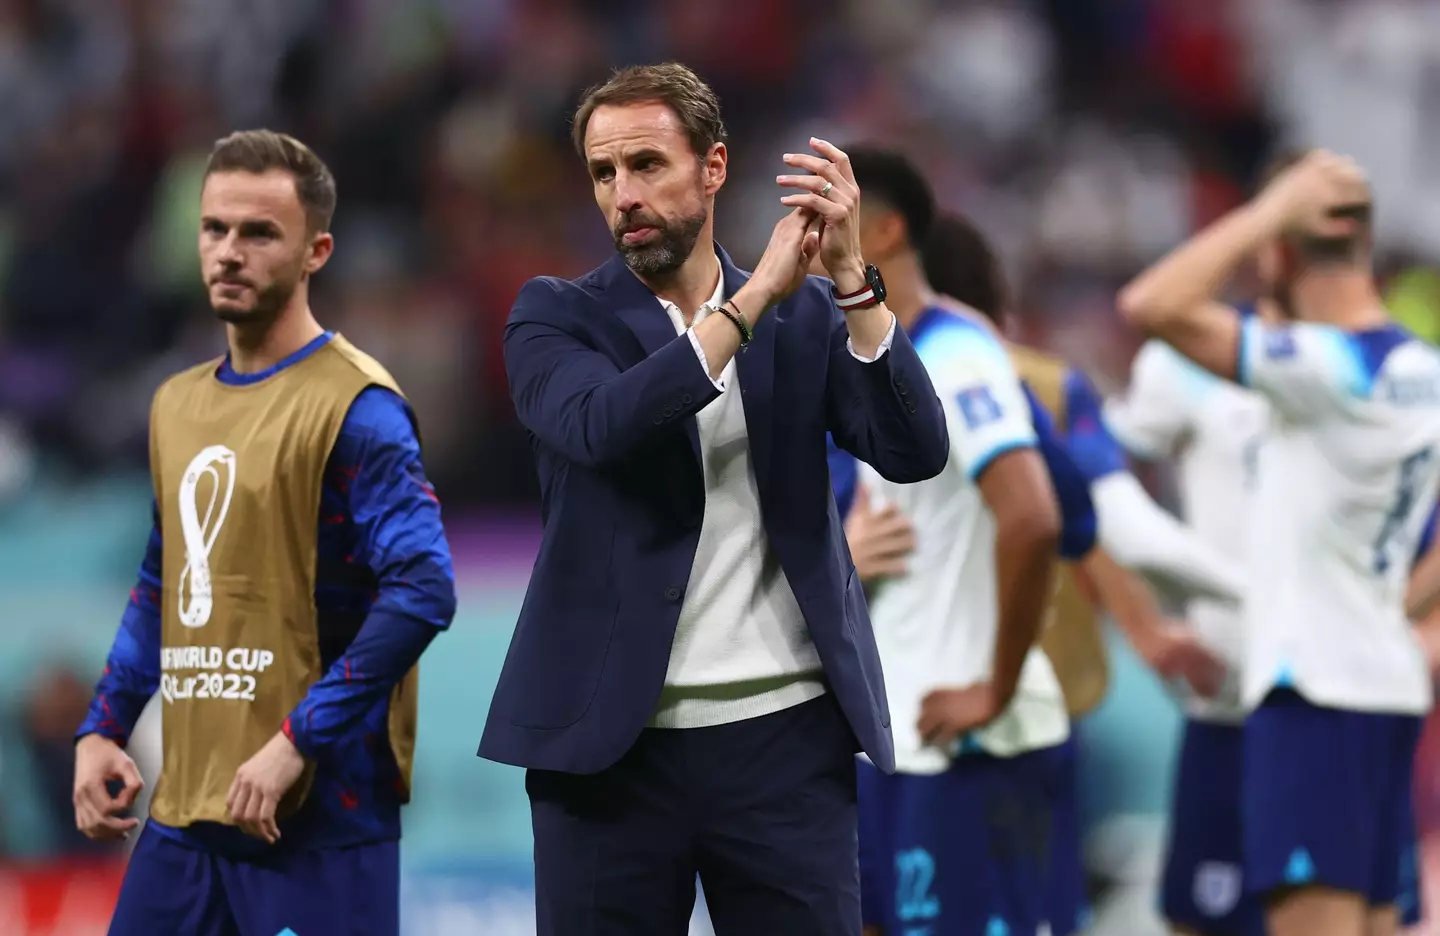 Southgate applauds England fans on Saturday evening. (Image